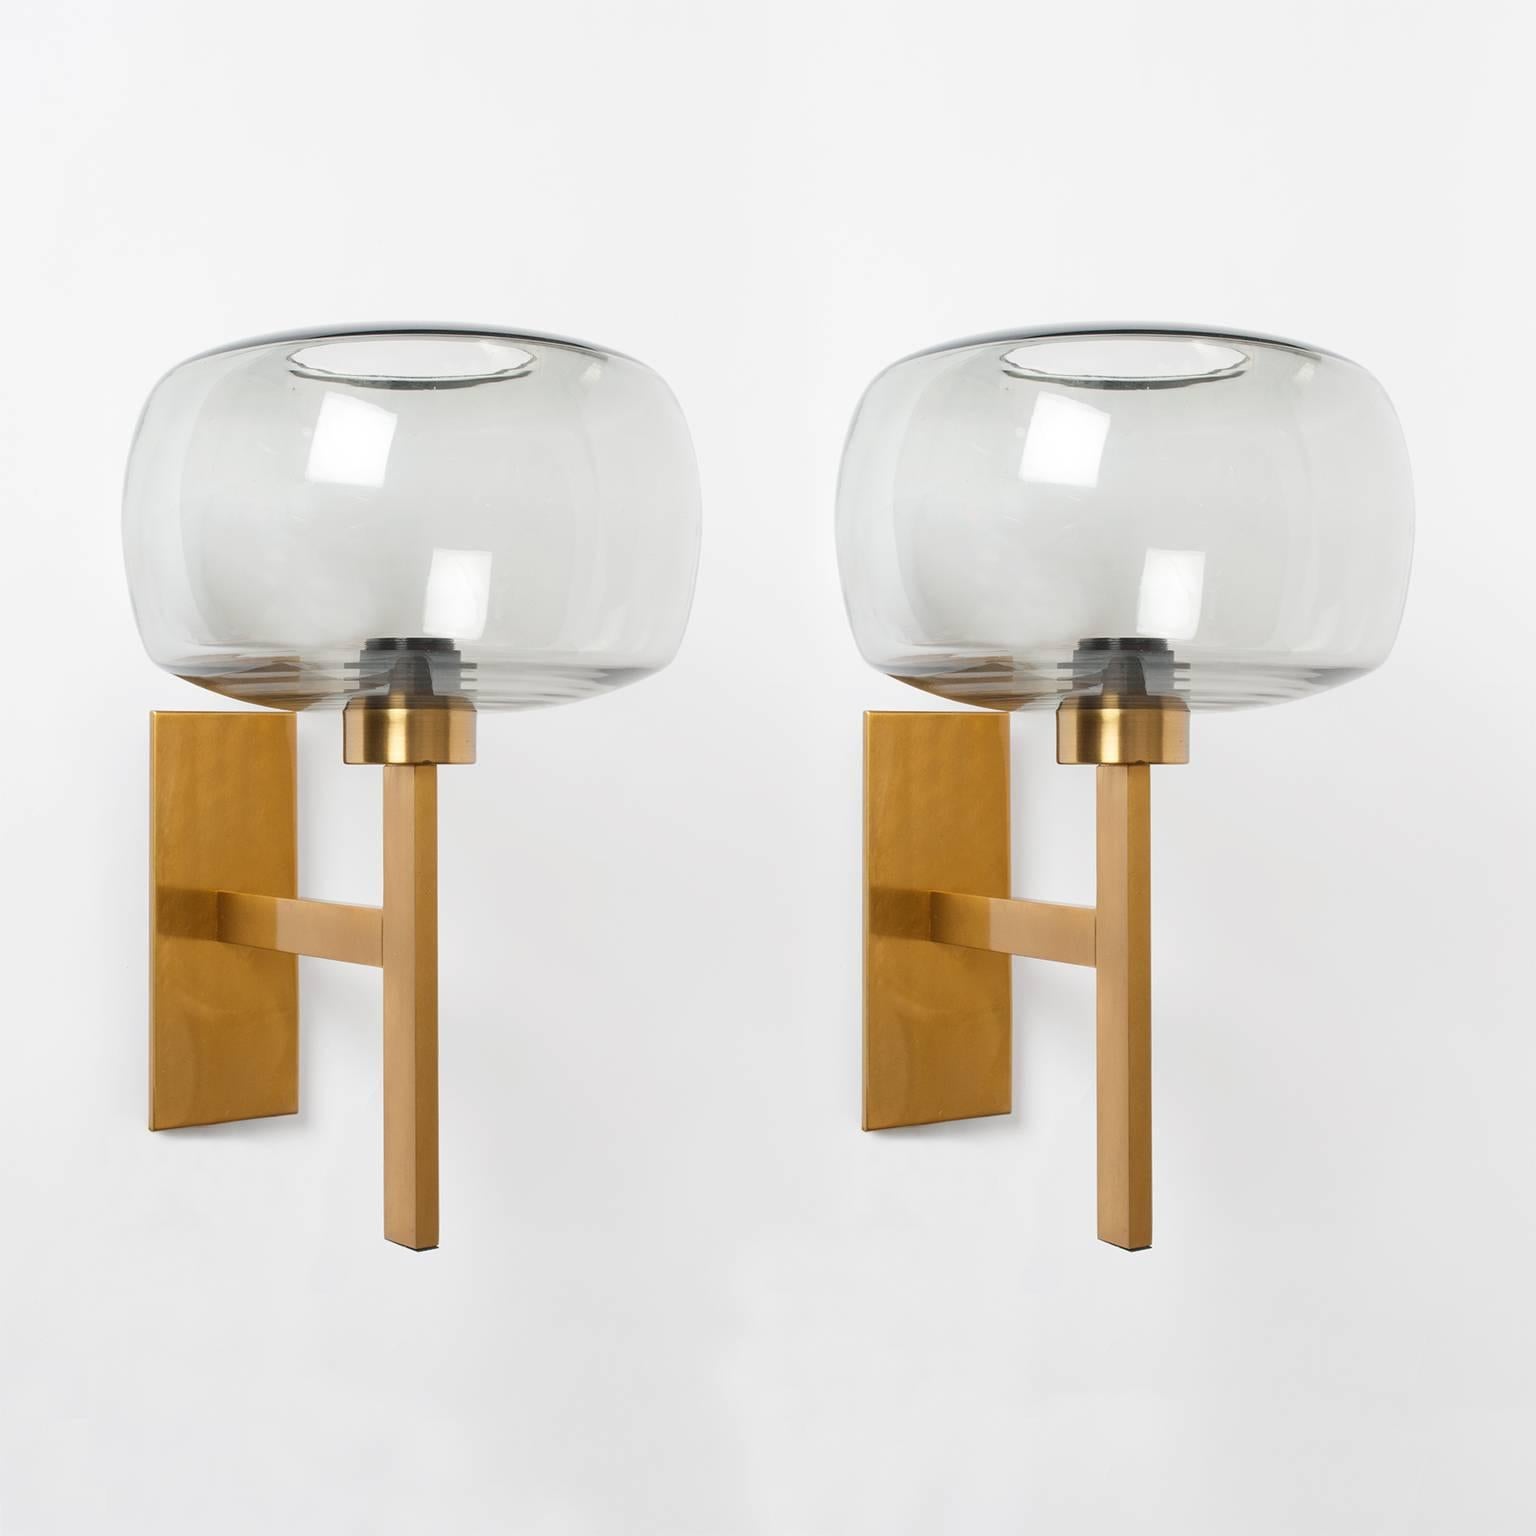 A large pair of Scandinavian Modern Westal Bankeryd polished and lacquered brass sconces with gray glass shades. Each sconce has a single arm with extends from a rectangular brass back plate. Newly wired with single Edison sockets for use in the